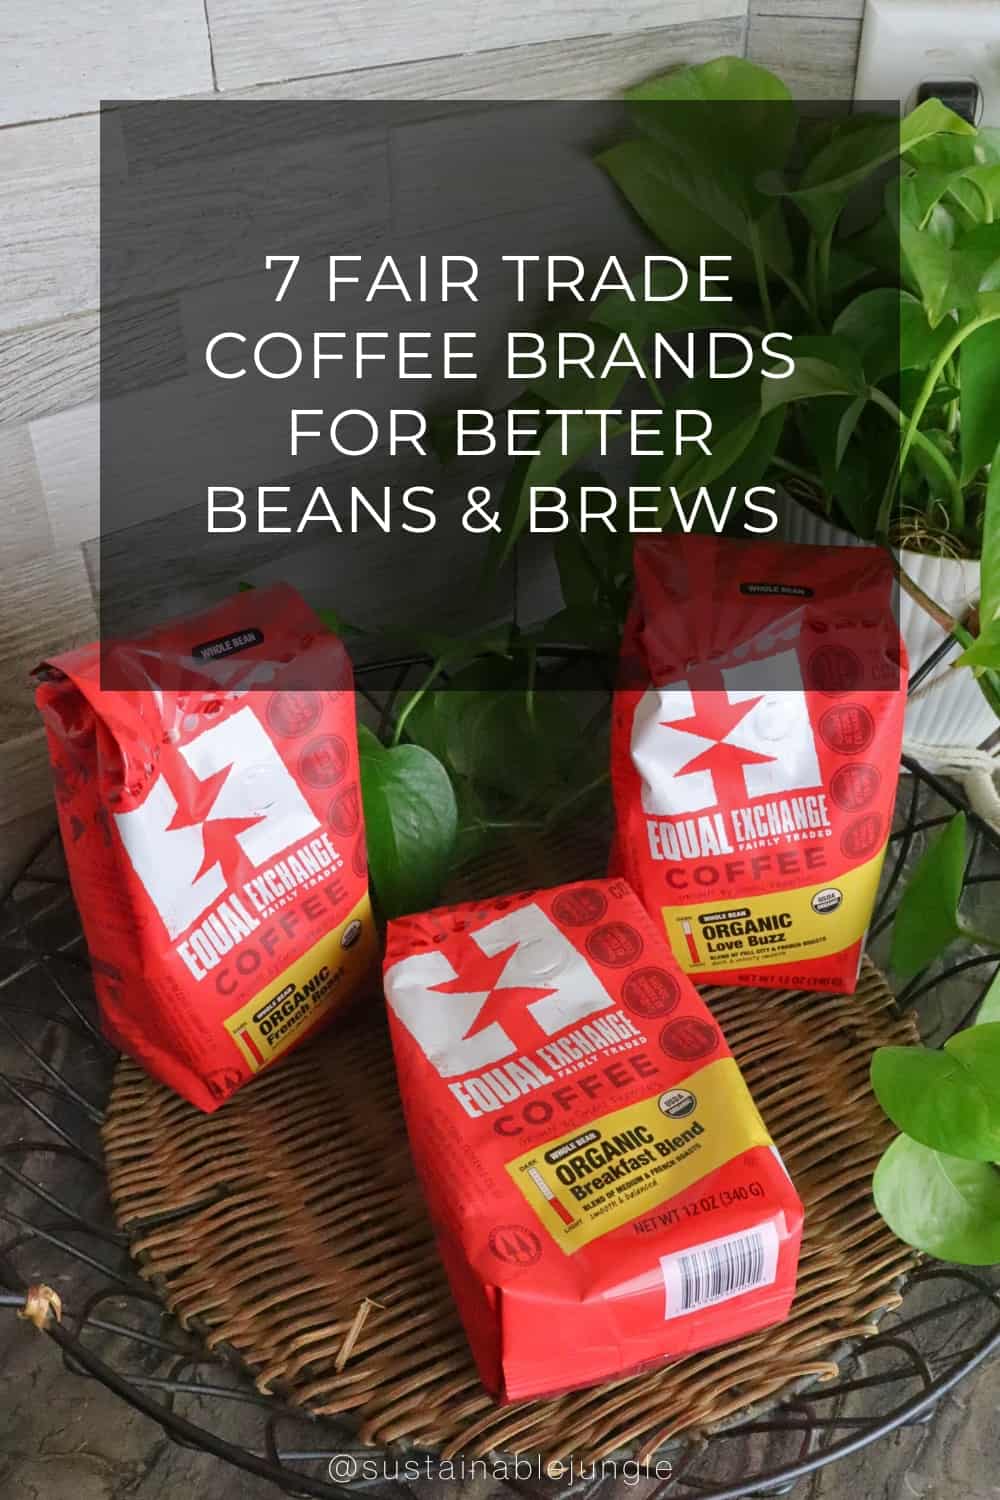 7 Fair Trade Coffee Brands For Better Beans & Brews Image by Sustainable Jungle #fairtradecoffeebrands #bestfairtradecoffee #directtradecoffeebrands #freetradecoffeebrands #fairtradeorganiccoffee #sustainablejungle